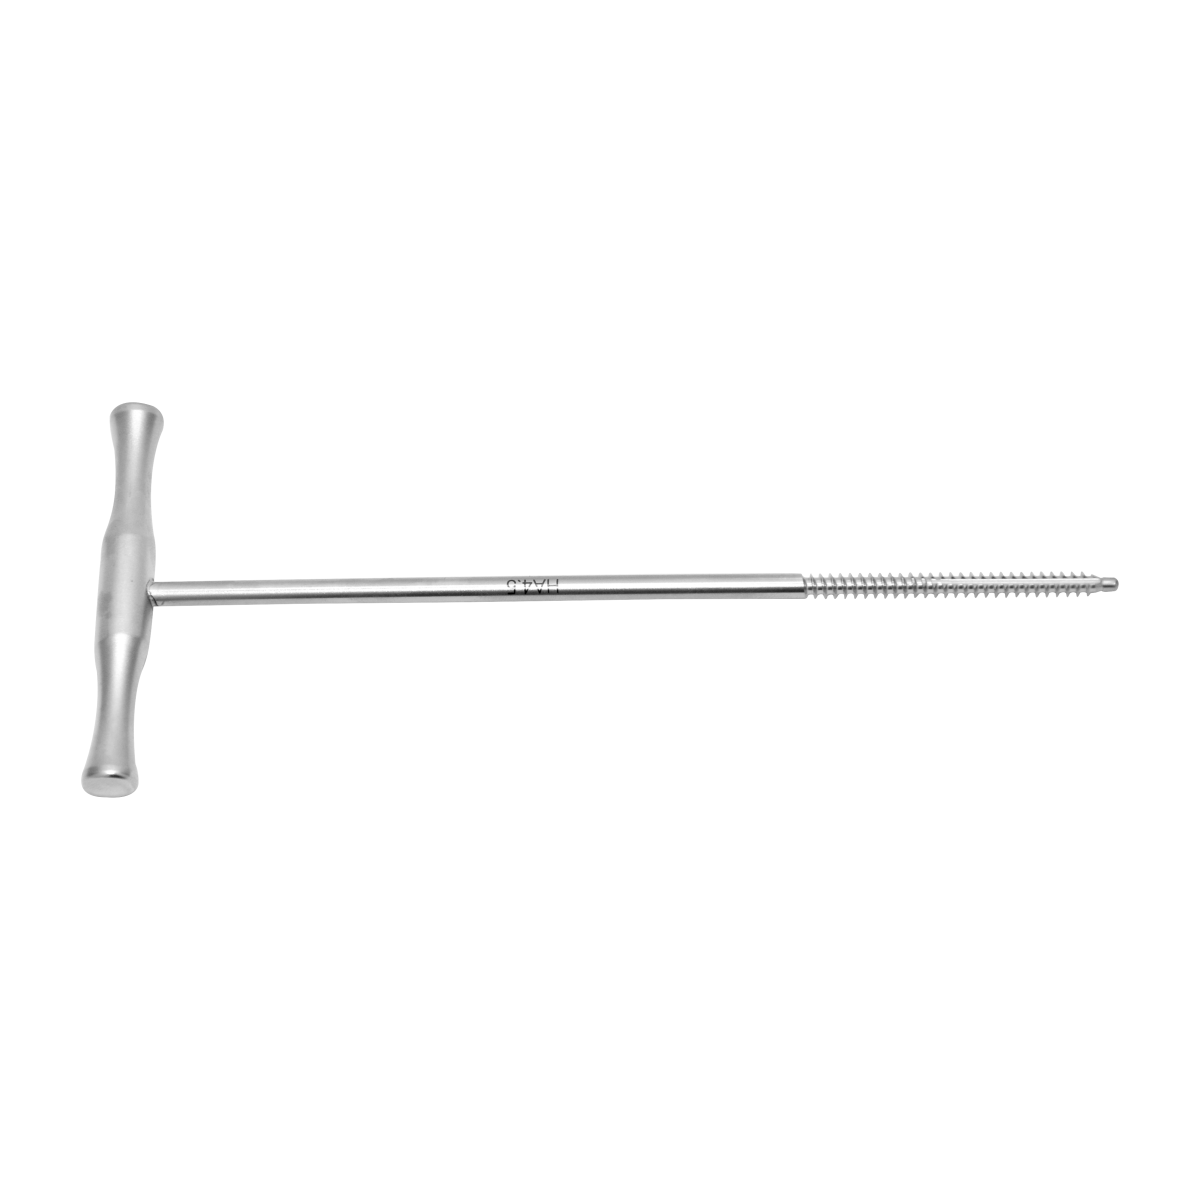 Bone Tap with T – Handle Dia. 4.5mm Thread Length 55mm, Total Length 175mm